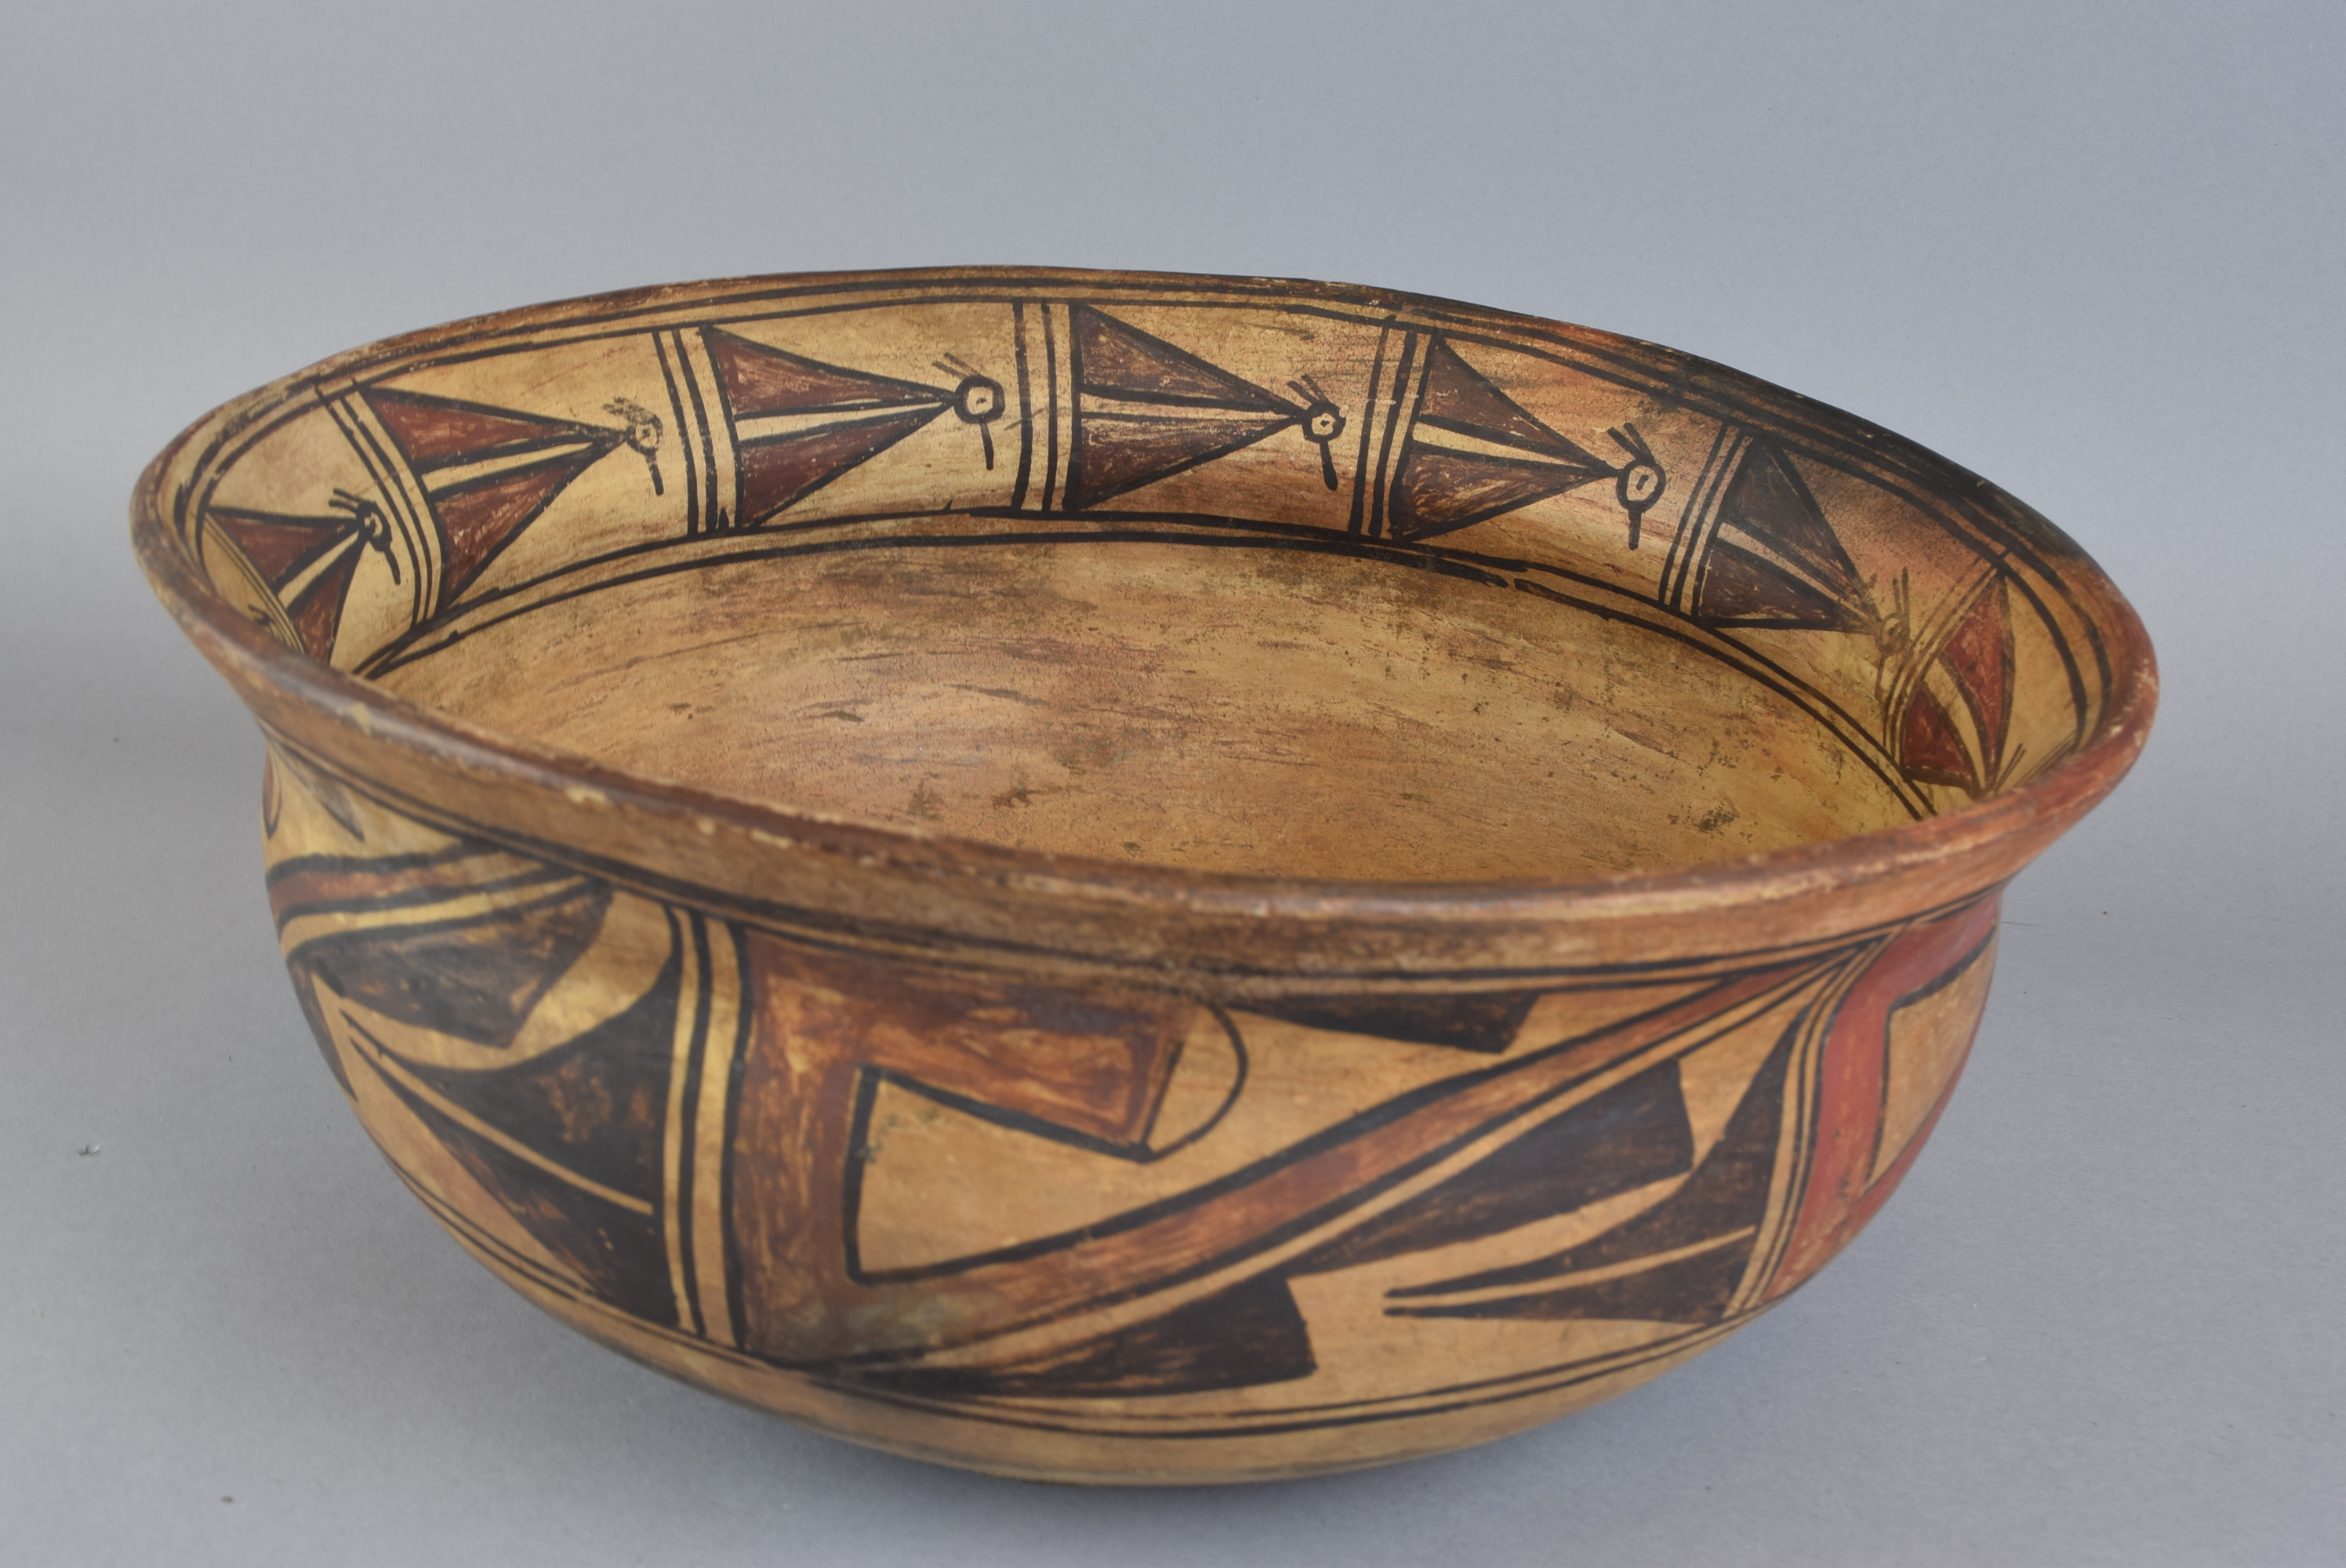 A bowl with brown and beige figures on the rim